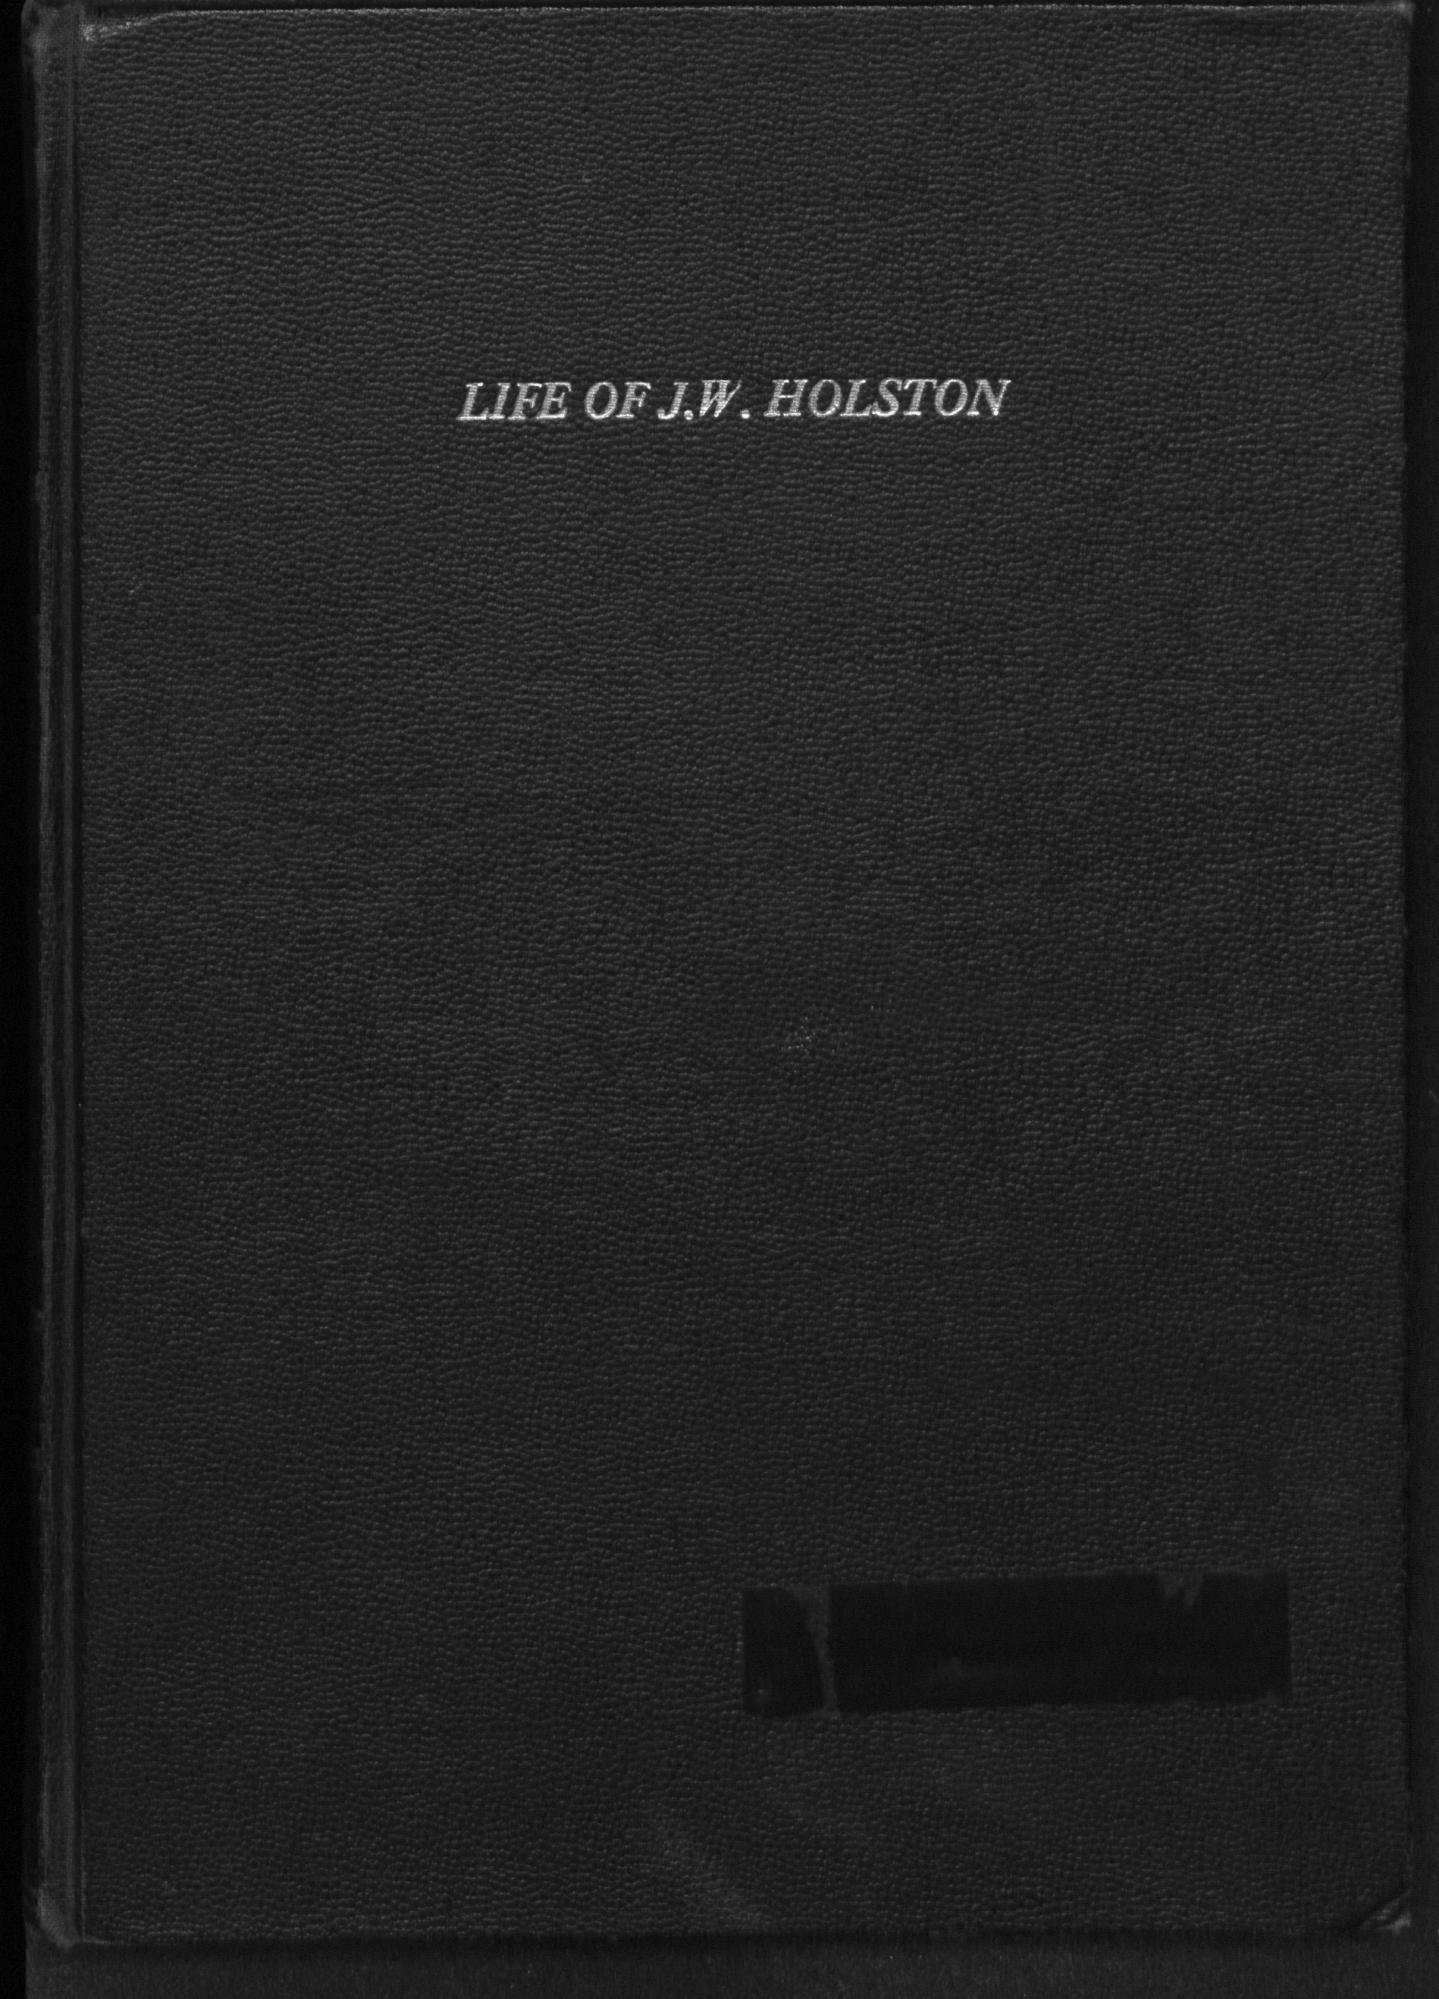 Life of J. W. Holston
                                                
                                                    [Sequence #]: 1 of 46
                                                